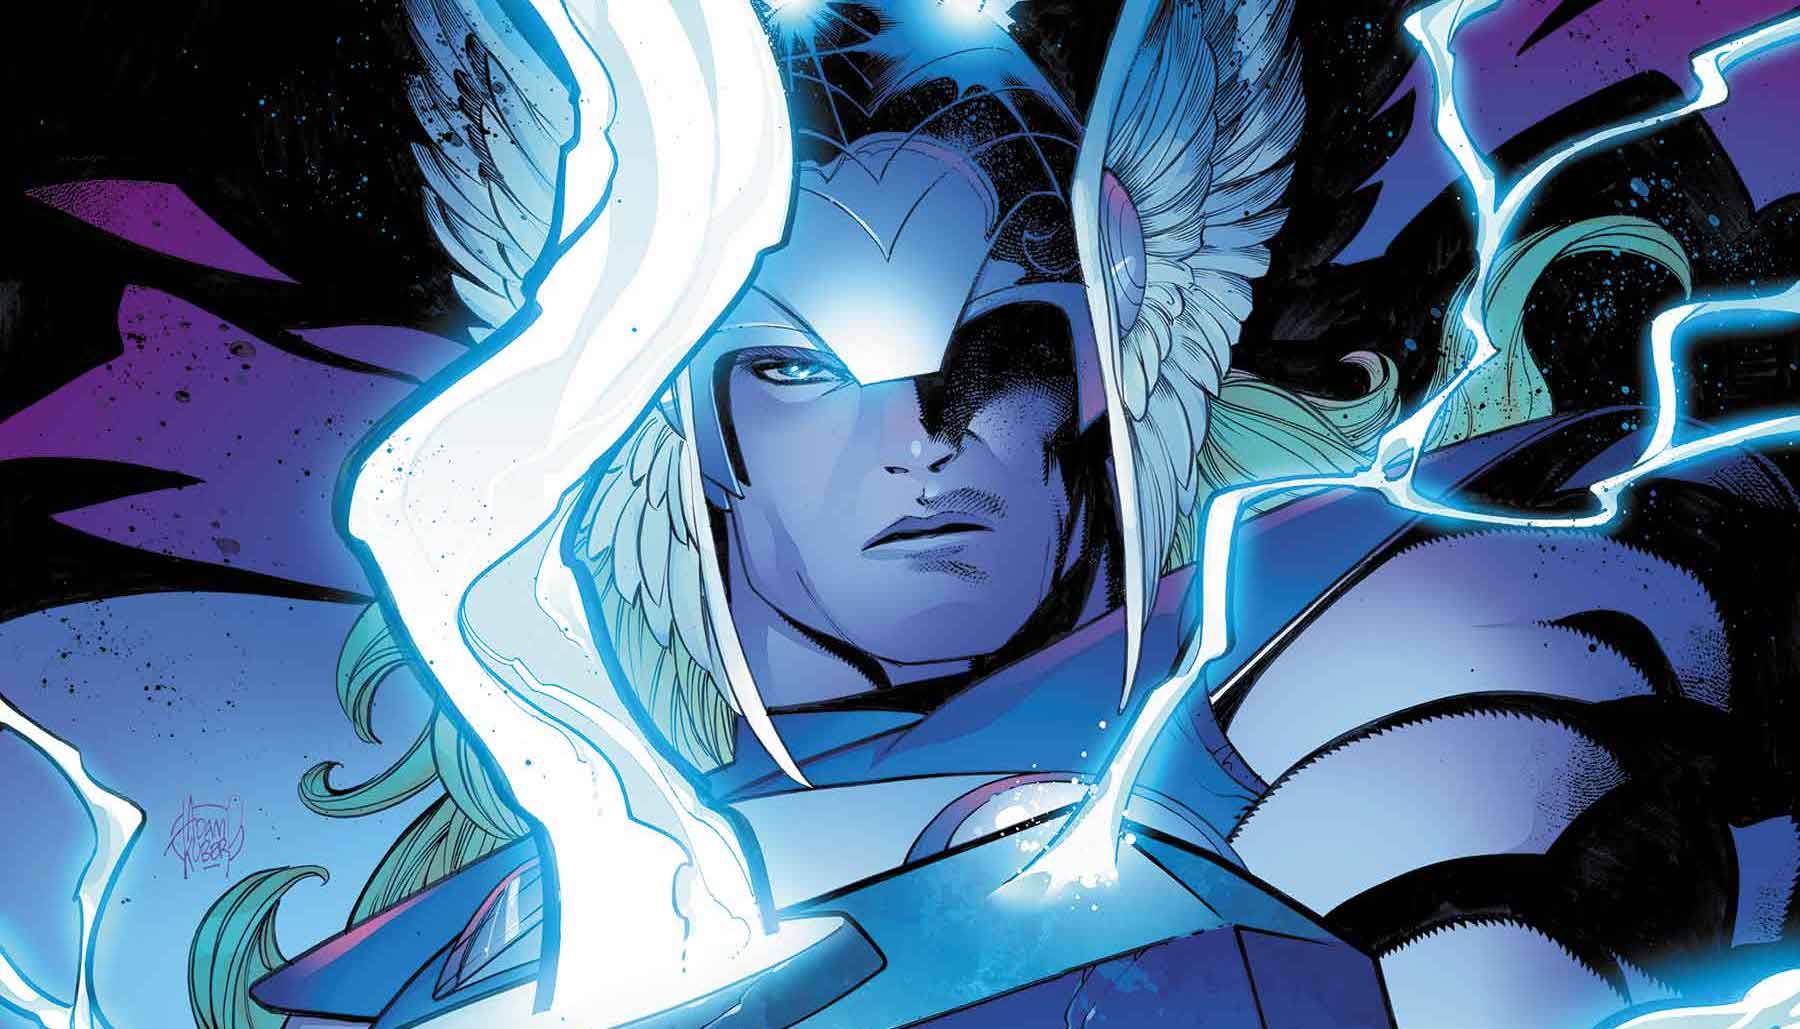 'Thor Annual' #1 to feature an evolved M.O.D.O.K. in blockbuster showdown